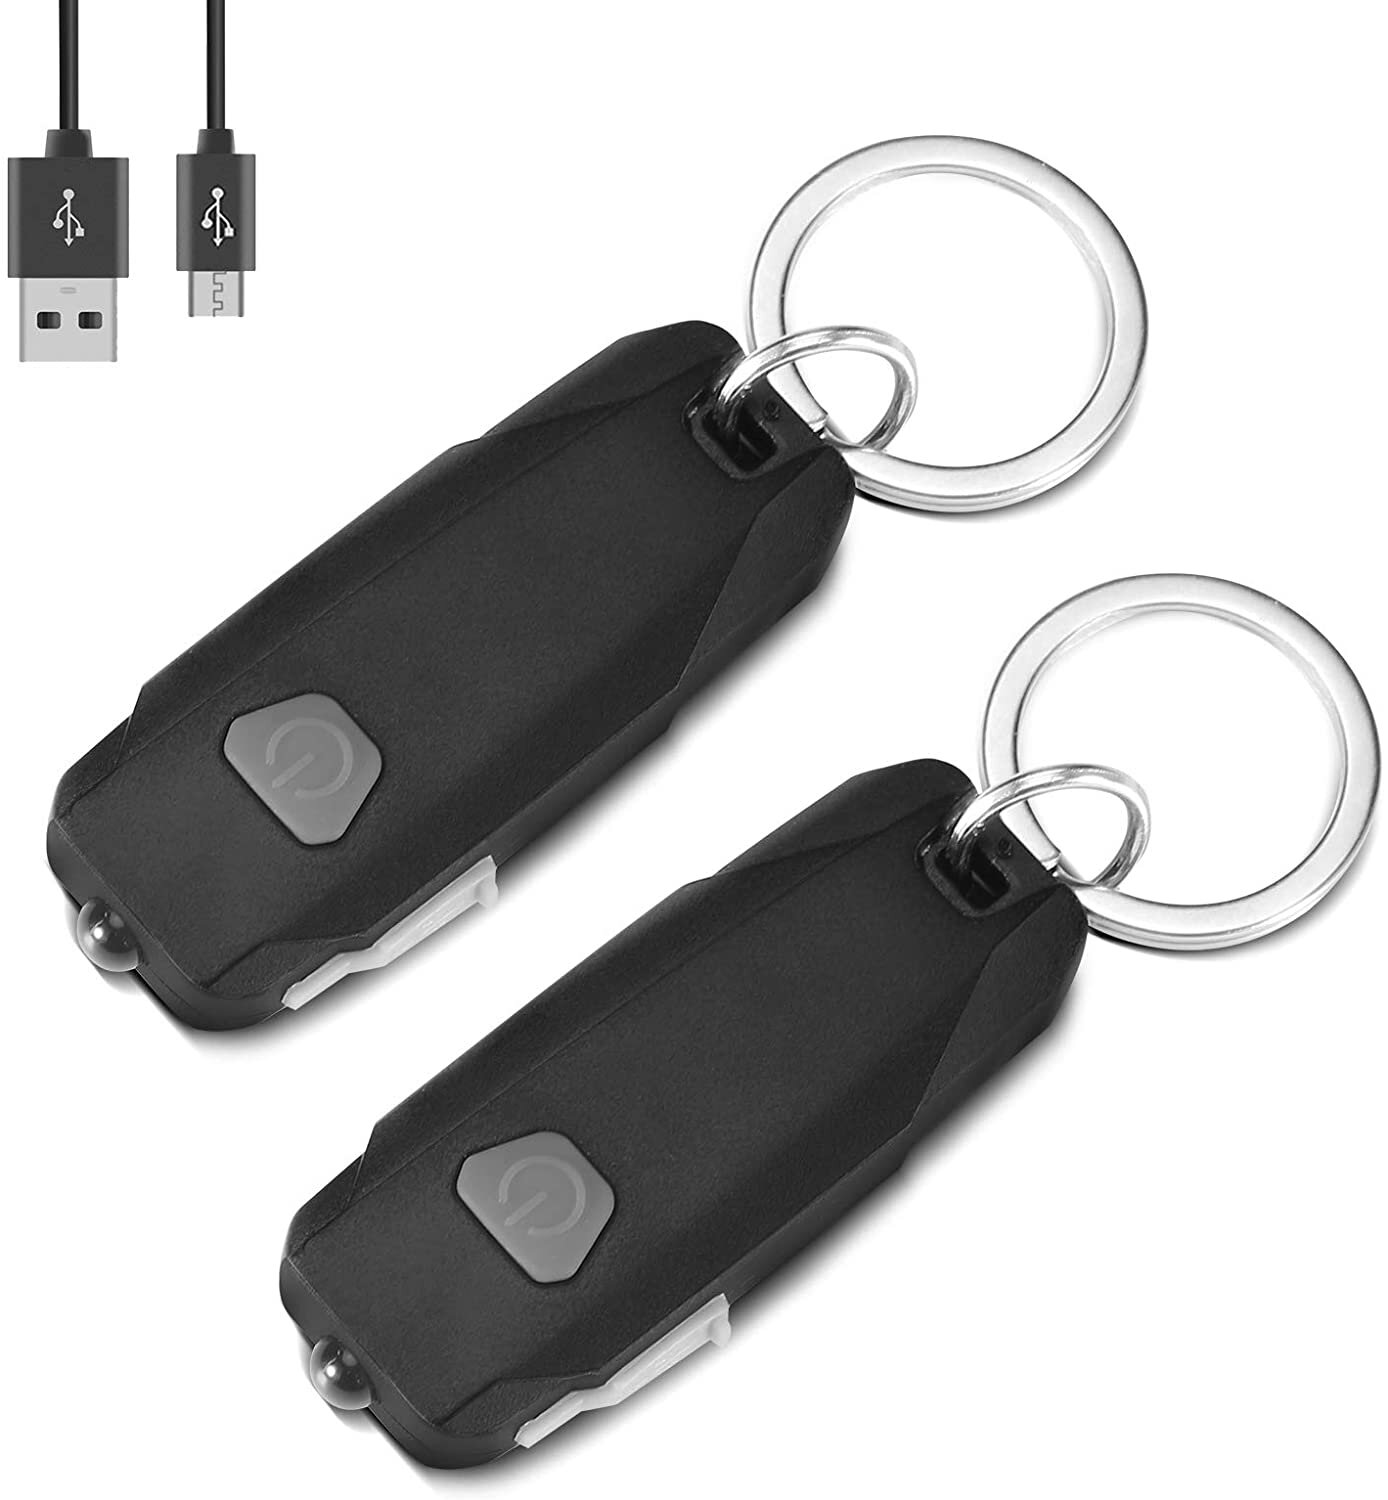 MECO 2 Pack Mini Led Lights ، Portable USB Rechargeable Ultra مشرق Keychain Flashlight with 2 Level مشرقness Key Ring To